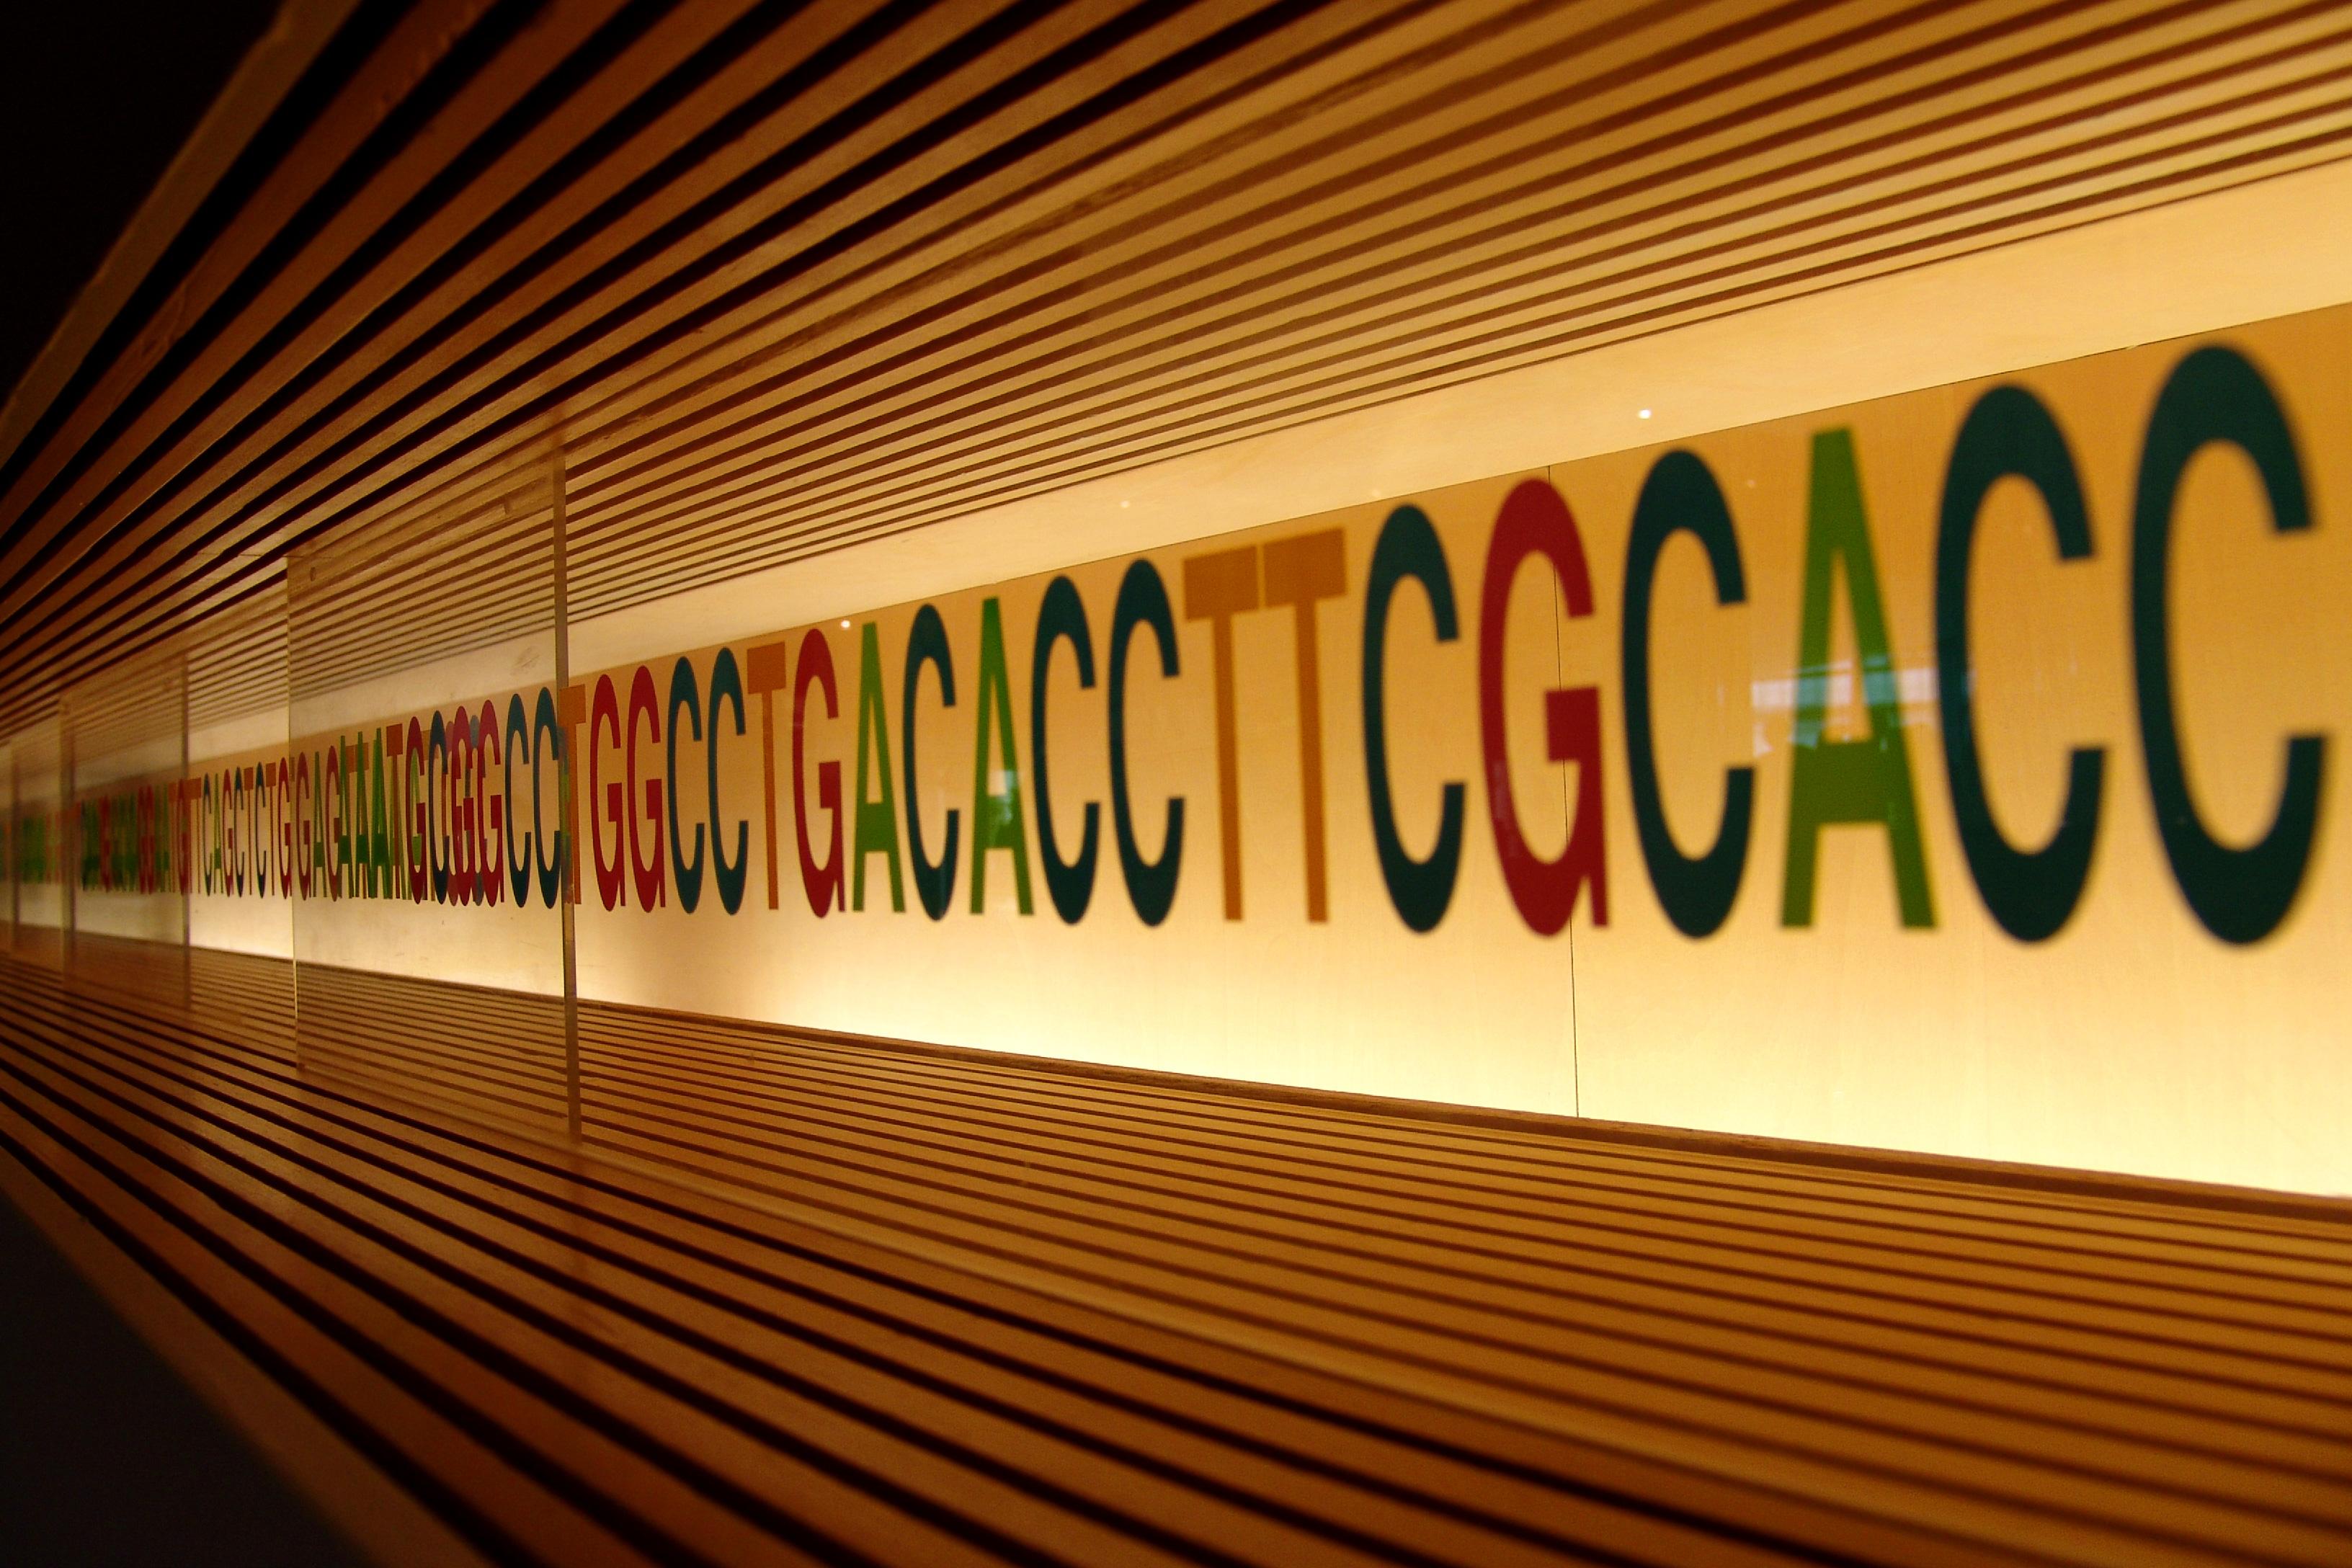 The letters ATCG are lined on a wall, with several different colors against an illuminated background